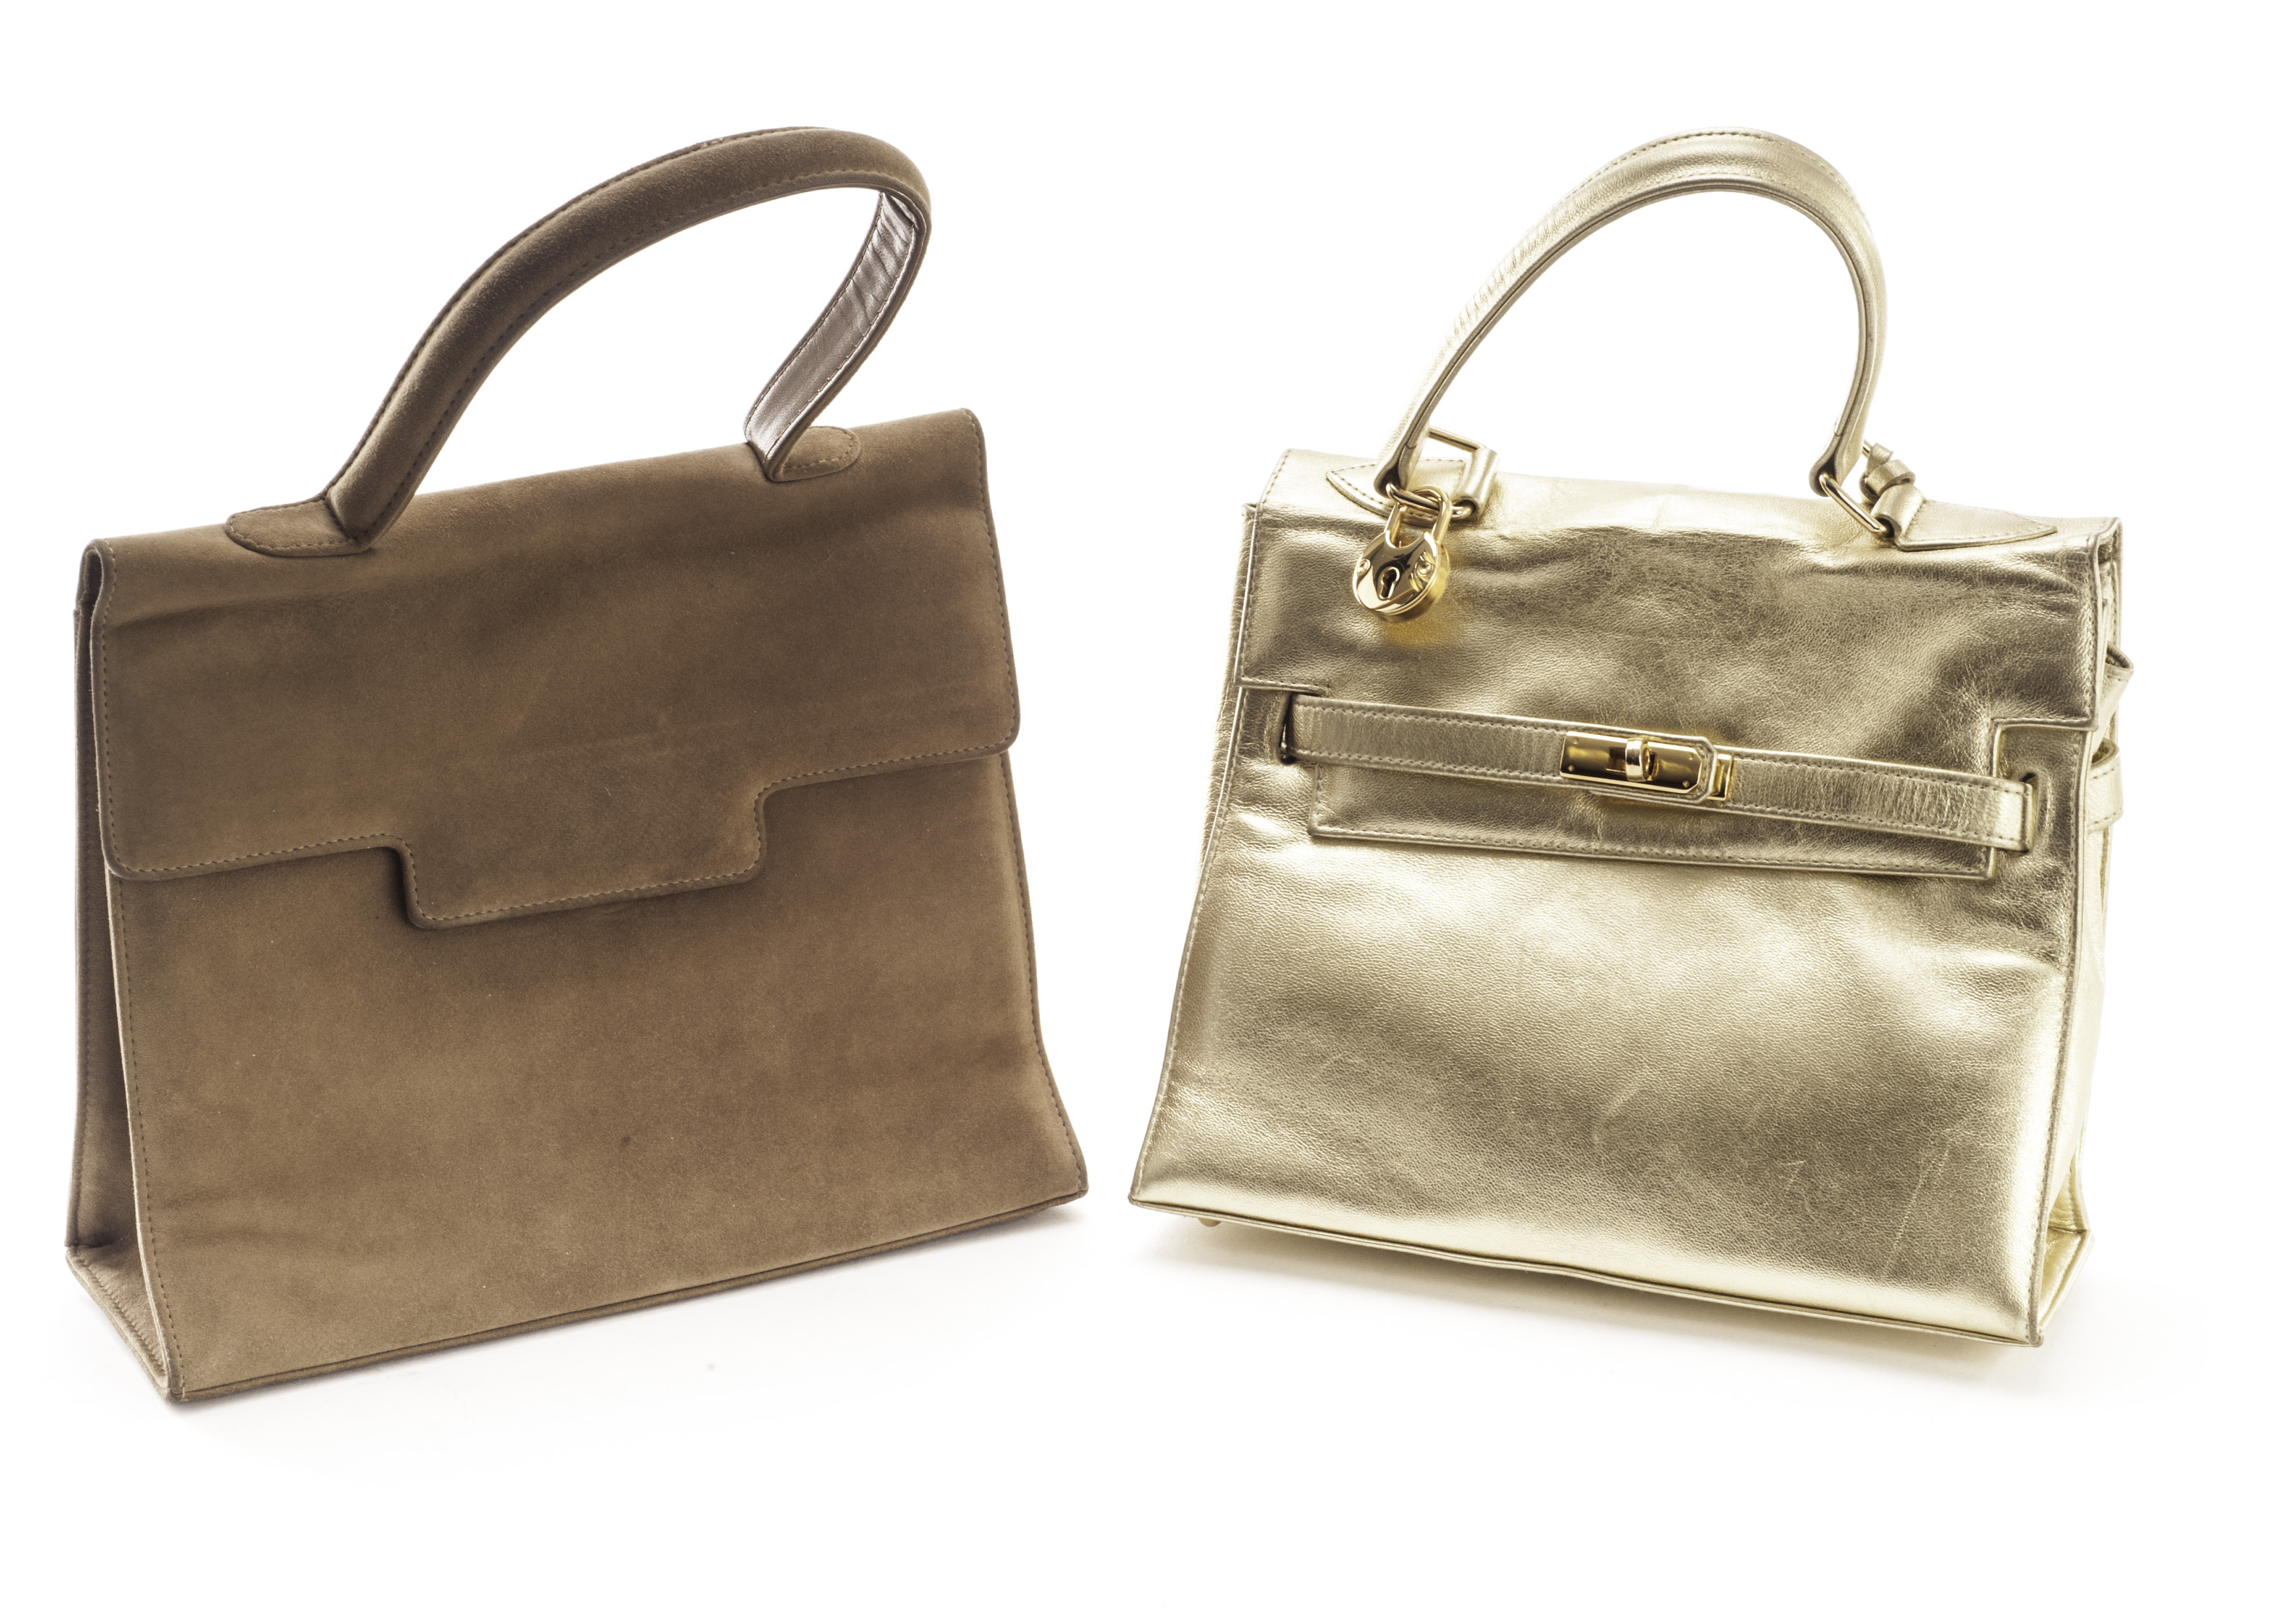 Two Charles Jourdan handbags, one in gold, the other in camel suede, in good condition (2)